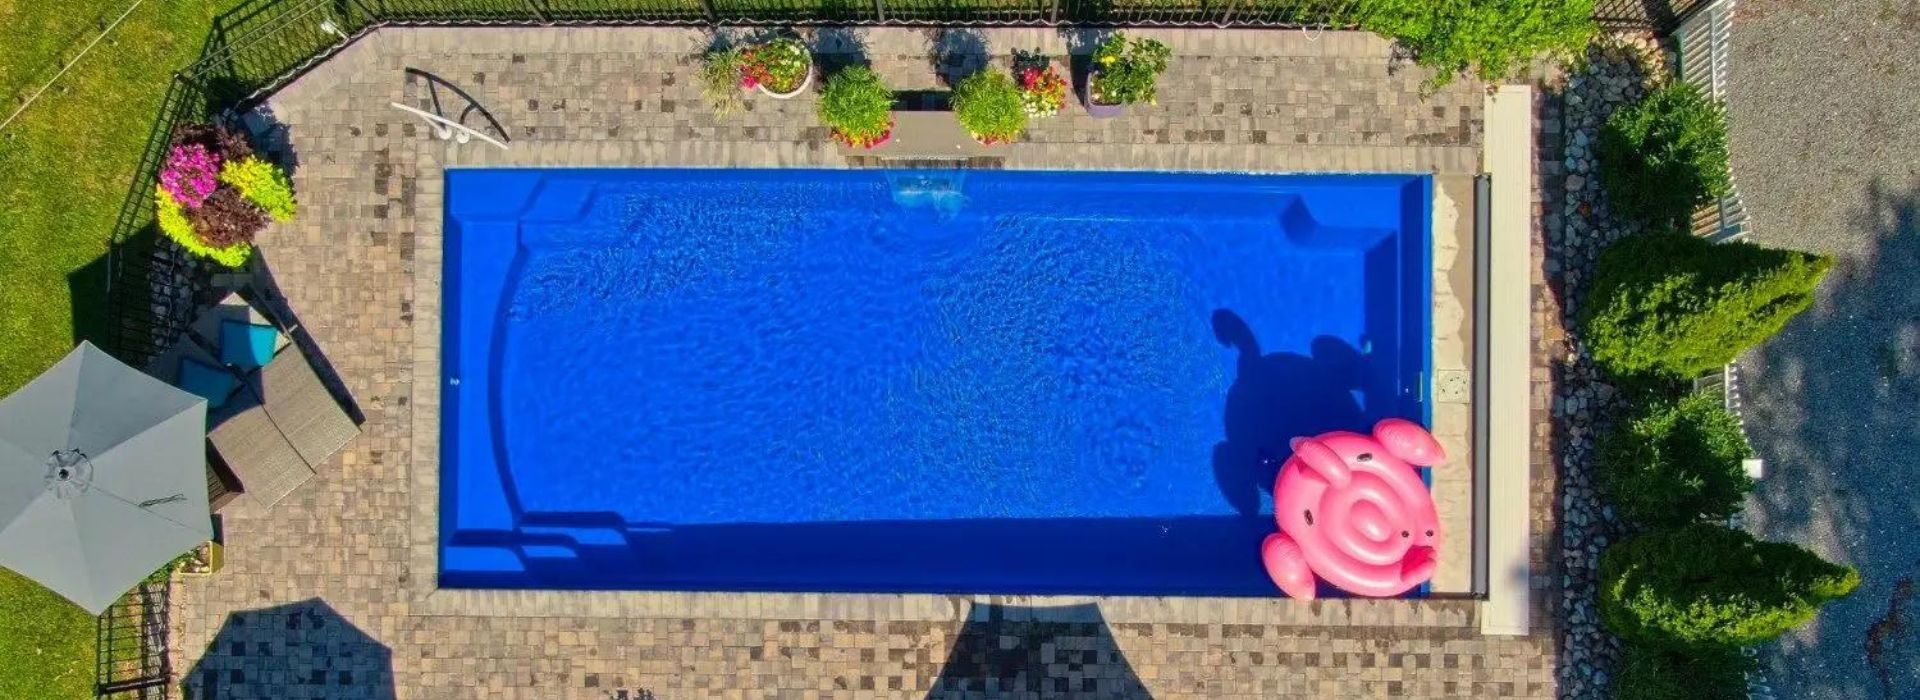 Aerial view of deep blue rectangular inground swimming pool surrounded by a stone deck with plants and furniture